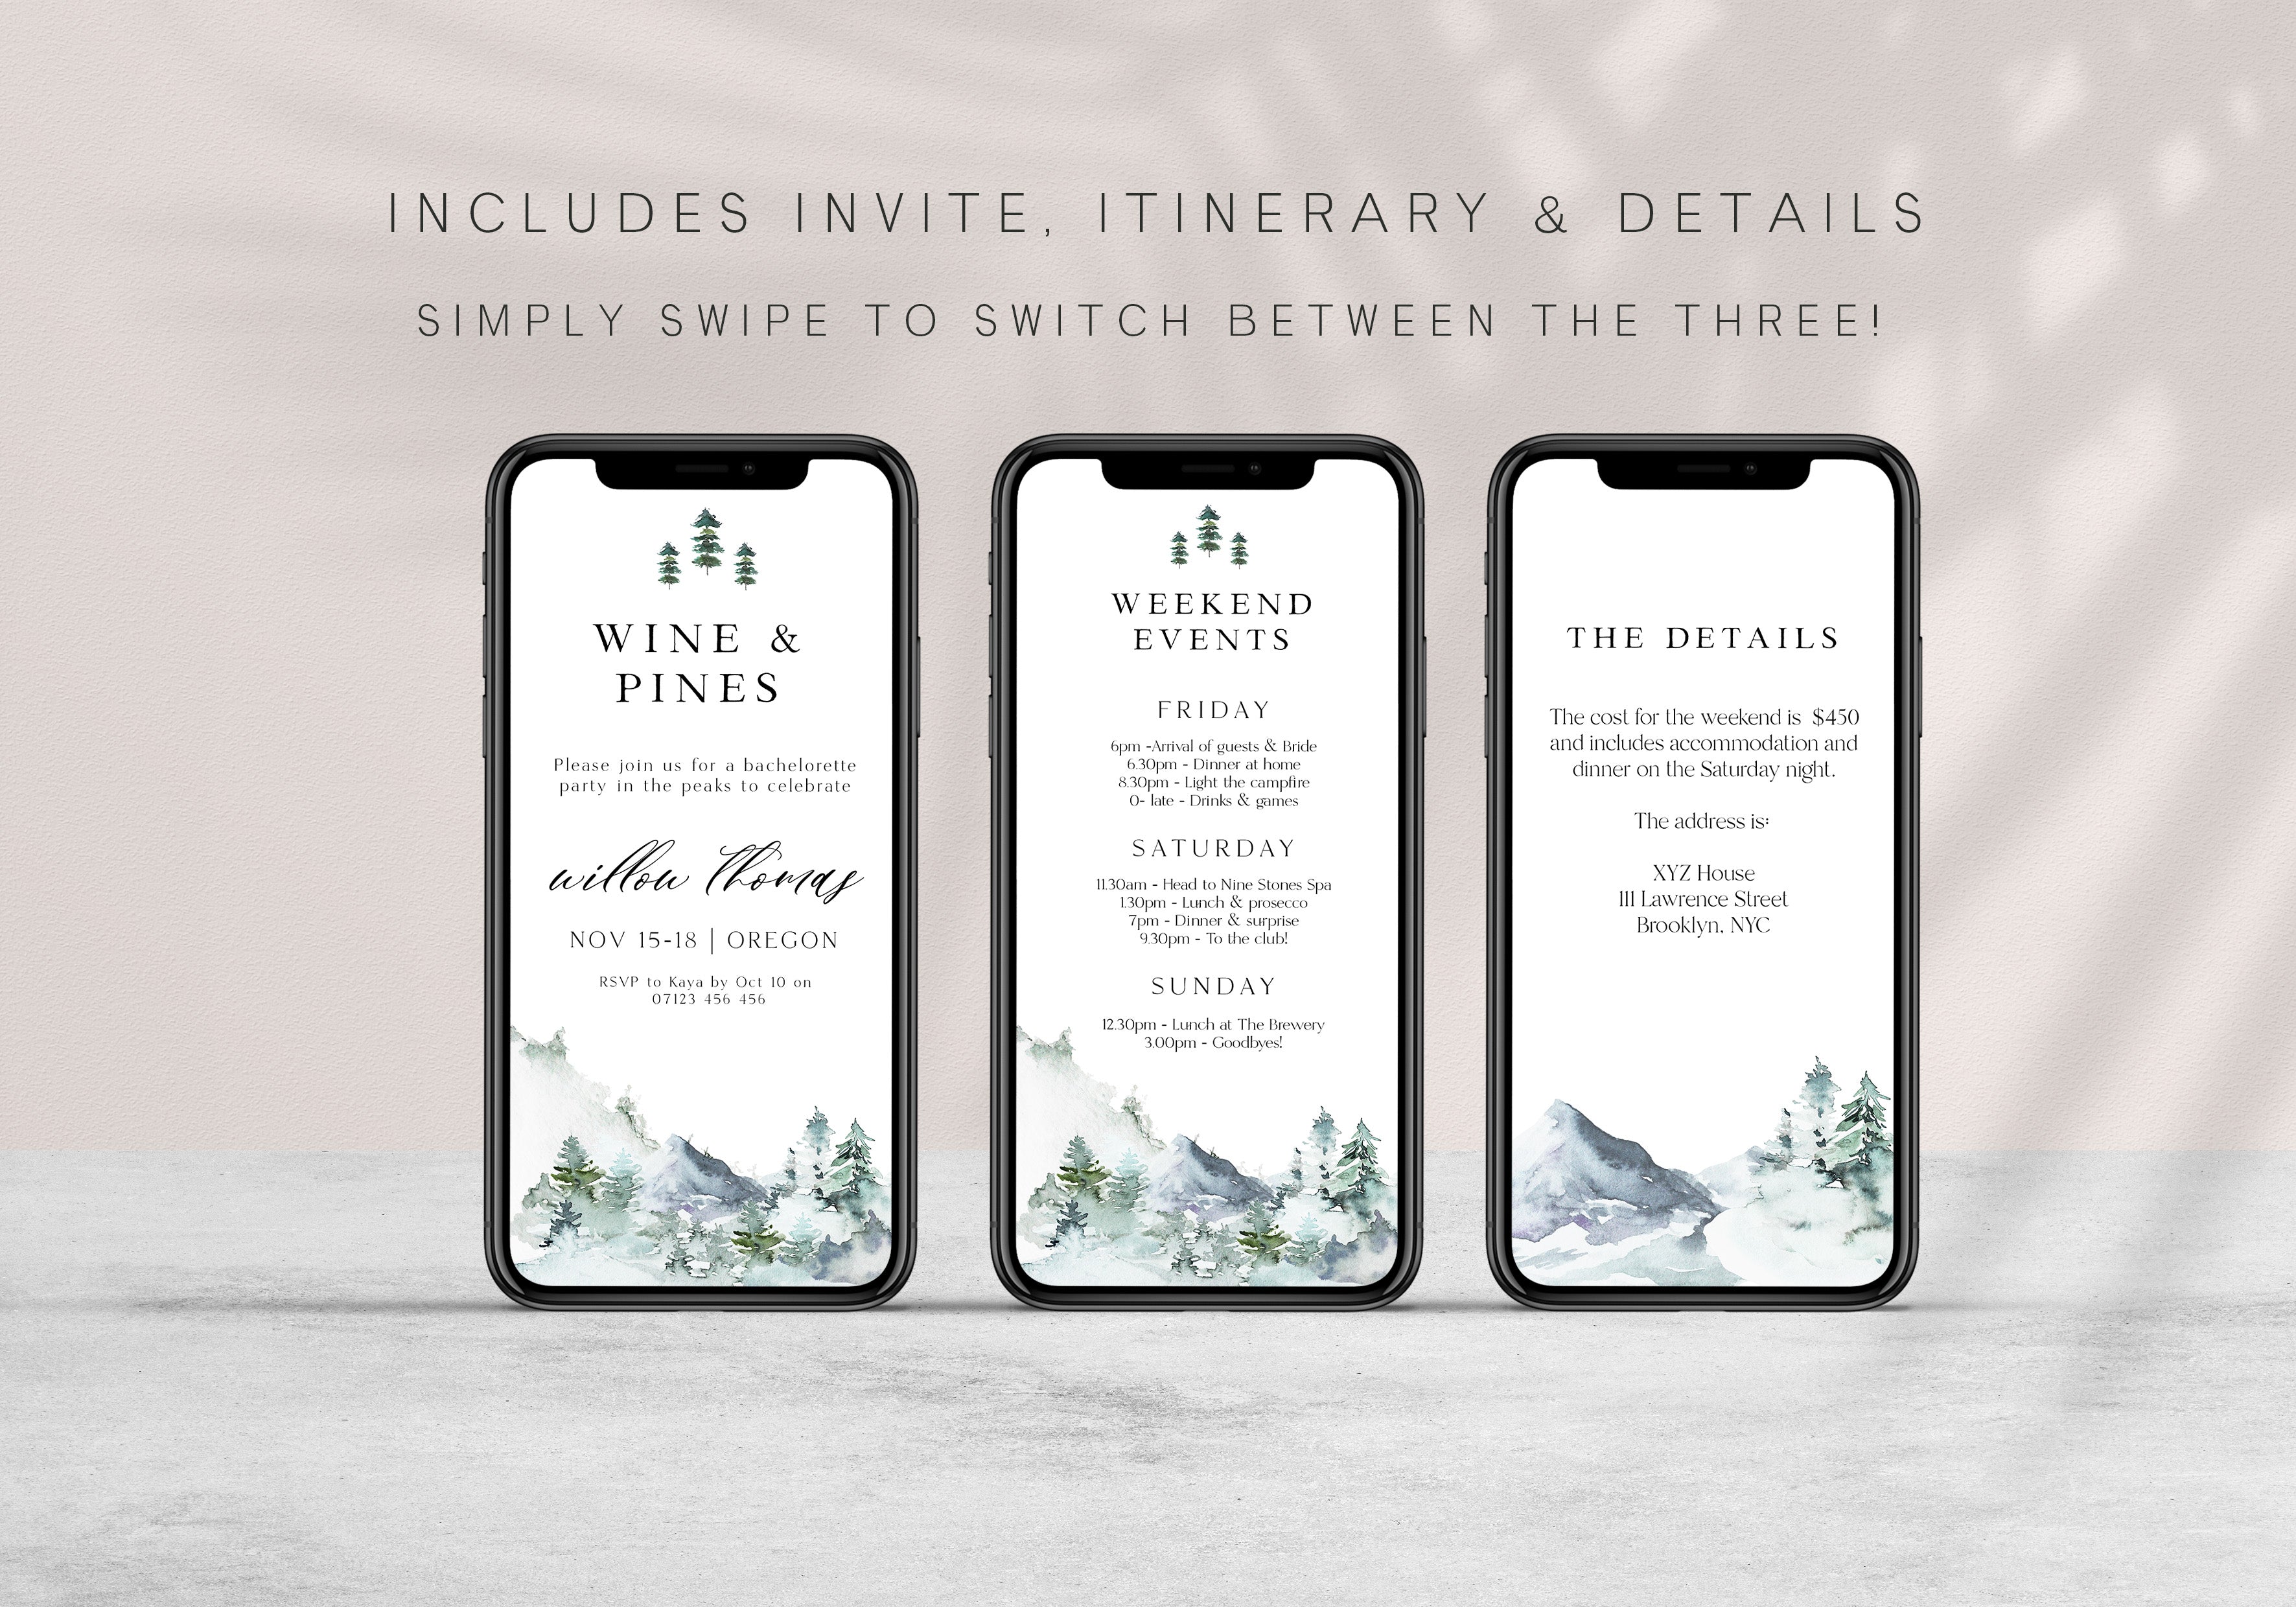 Fully editable mountain cabin mobile invitation with a mountain design. Perfect for a snowy cabin mountain bachelorette party